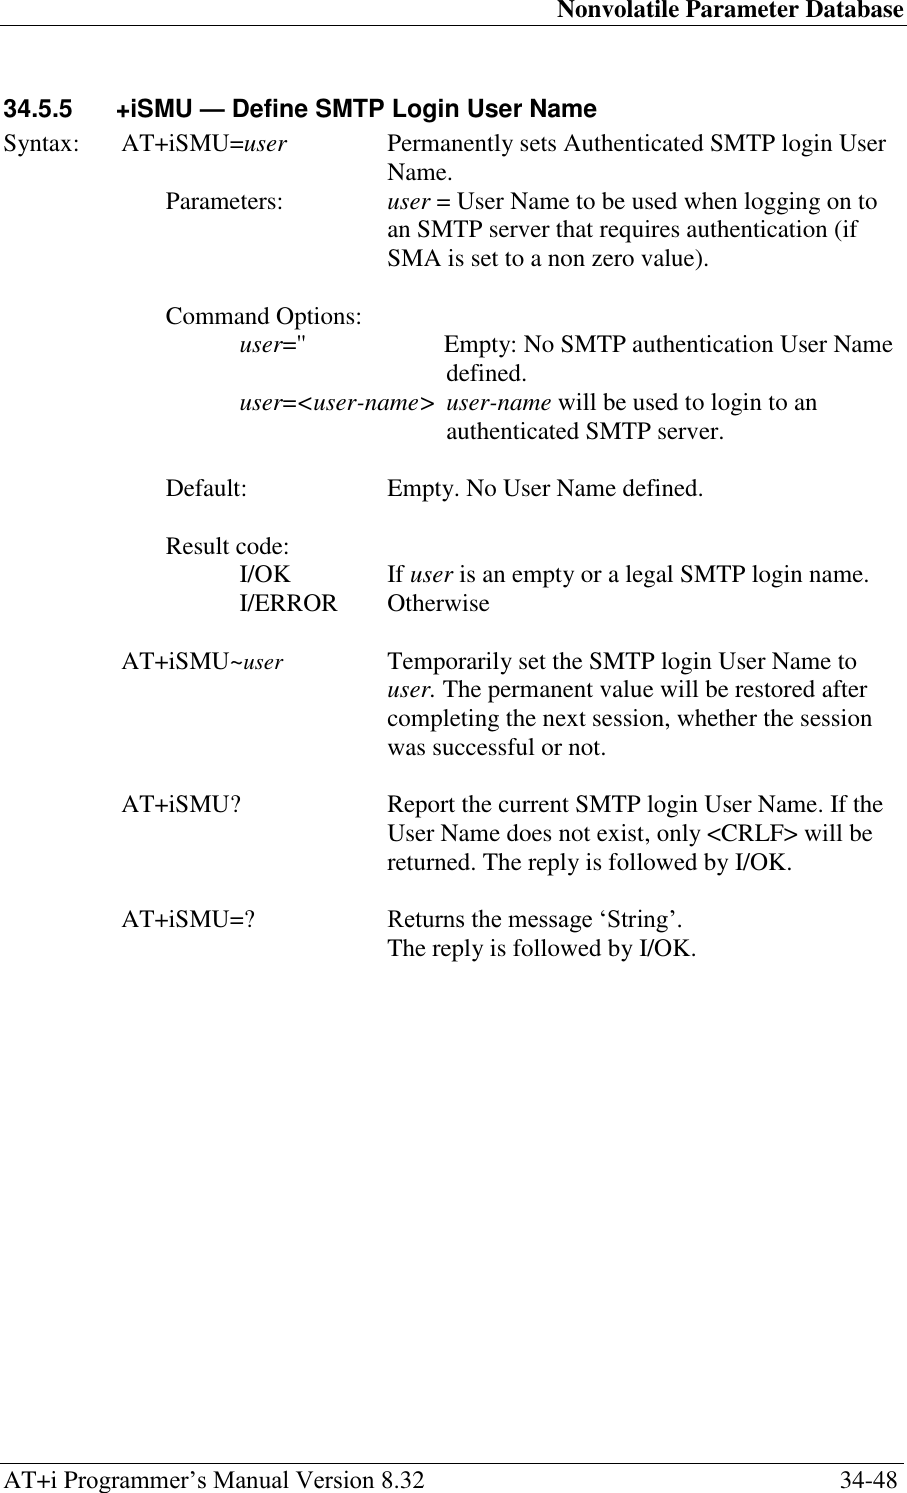 Nonvolatile Parameter Database AT+i Programmer‘s Manual Version 8.32  34-48 34.5.5  +iSMU — Define SMTP Login User Name  Syntax:  AT+iSMU=user  Permanently sets Authenticated SMTP login User Name. Parameters:  user = User Name to be used when logging on to an SMTP server that requires authentication (if SMA is set to a non zero value).  Command Options: user=&apos;&apos;  Empty: No SMTP authentication User Name defined. user=&lt;user-name&gt; user-name will be used to login to an authenticated SMTP server.  Default:  Empty. No User Name defined.   Result code: I/OK  If user is an empty or a legal SMTP login name. I/ERROR   Otherwise  AT+iSMU~user   Temporarily set the SMTP login User Name to user. The permanent value will be restored after completing the next session, whether the session was successful or not.  AT+iSMU?  Report the current SMTP login User Name. If the User Name does not exist, only &lt;CRLF&gt; will be returned. The reply is followed by I/OK.  AT+iSMU=?  Returns the message ‗String‘.  The reply is followed by I/OK. 